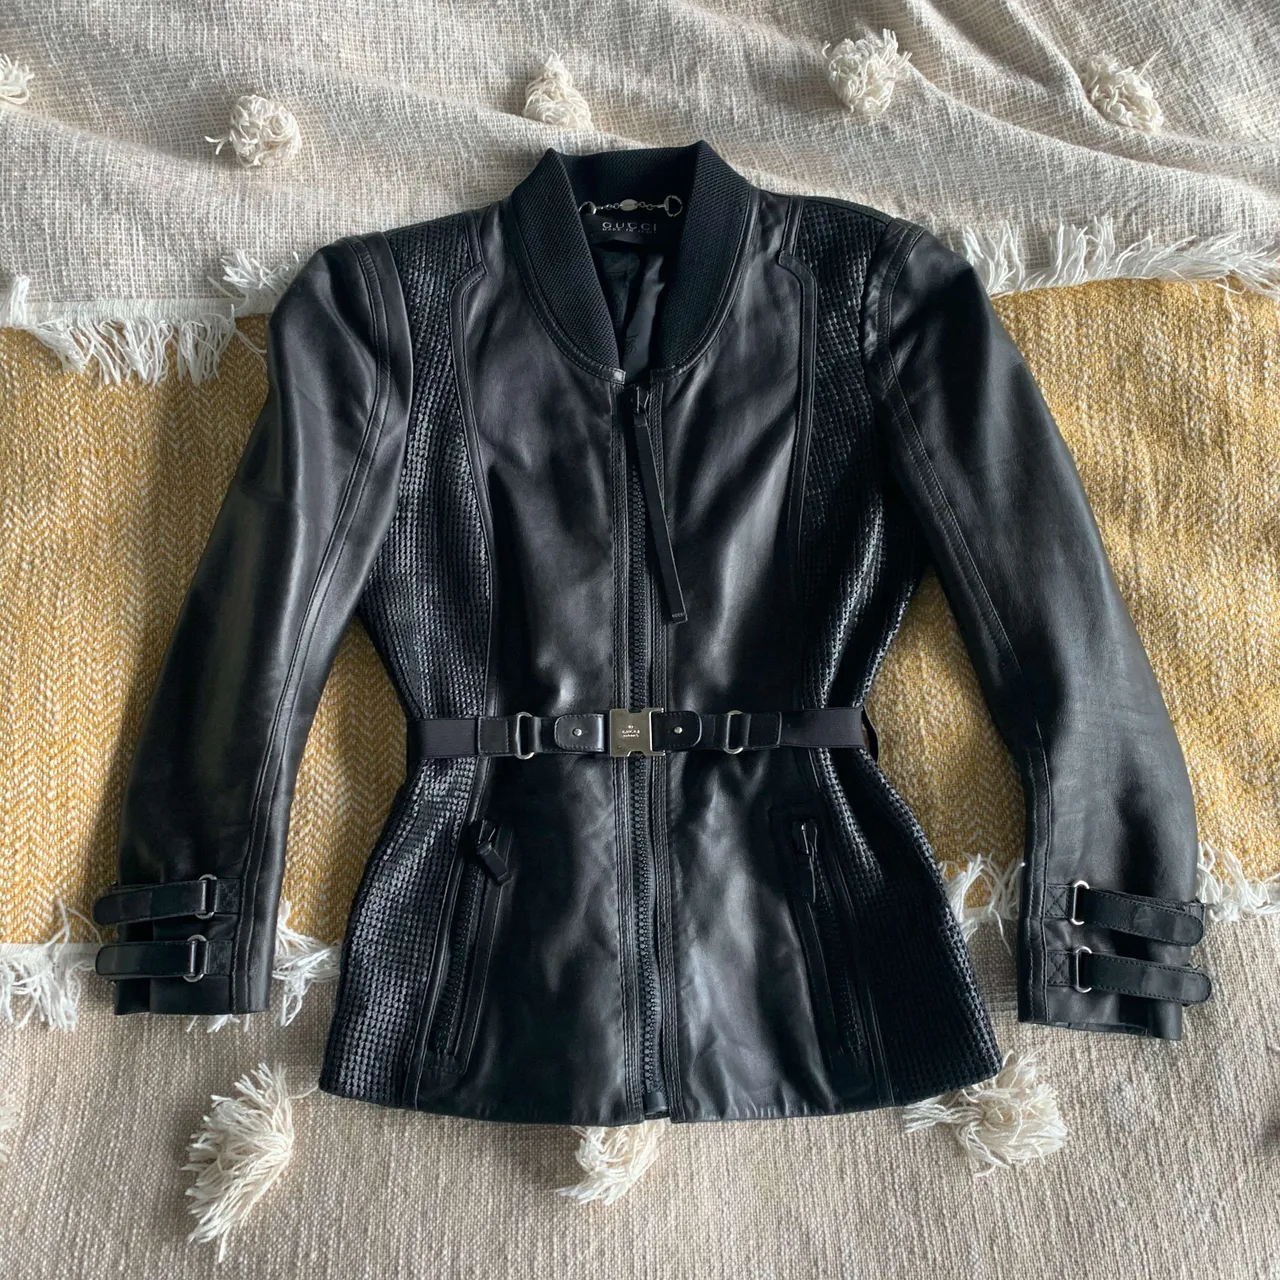 Authentic Gucci Leather Jacket photo 1